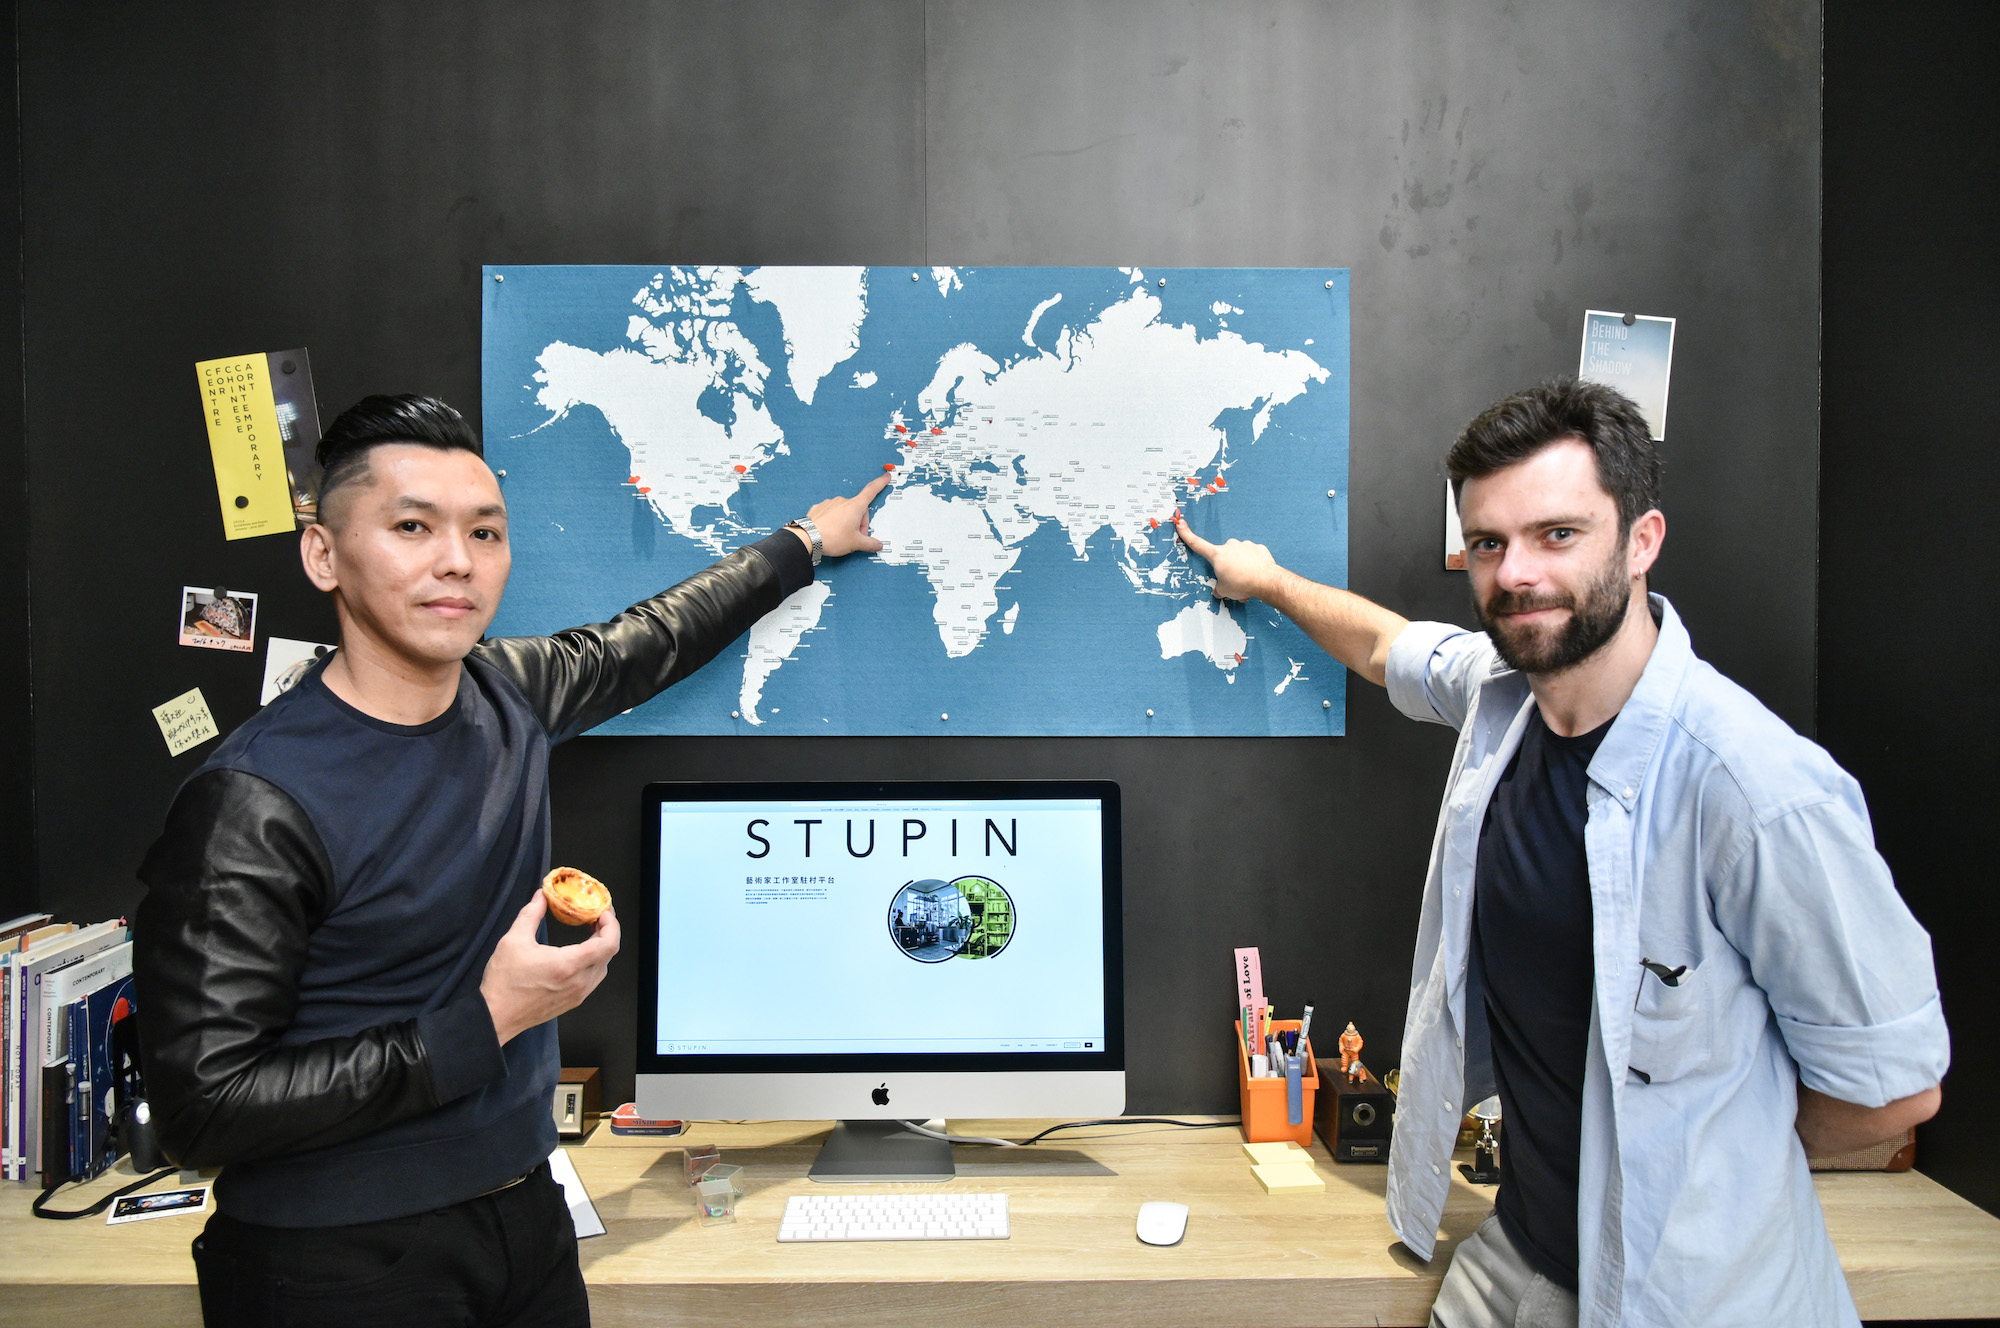 The 1st time residency exchange of STUPIN by artists KUO I-chen and Filipe Cortez